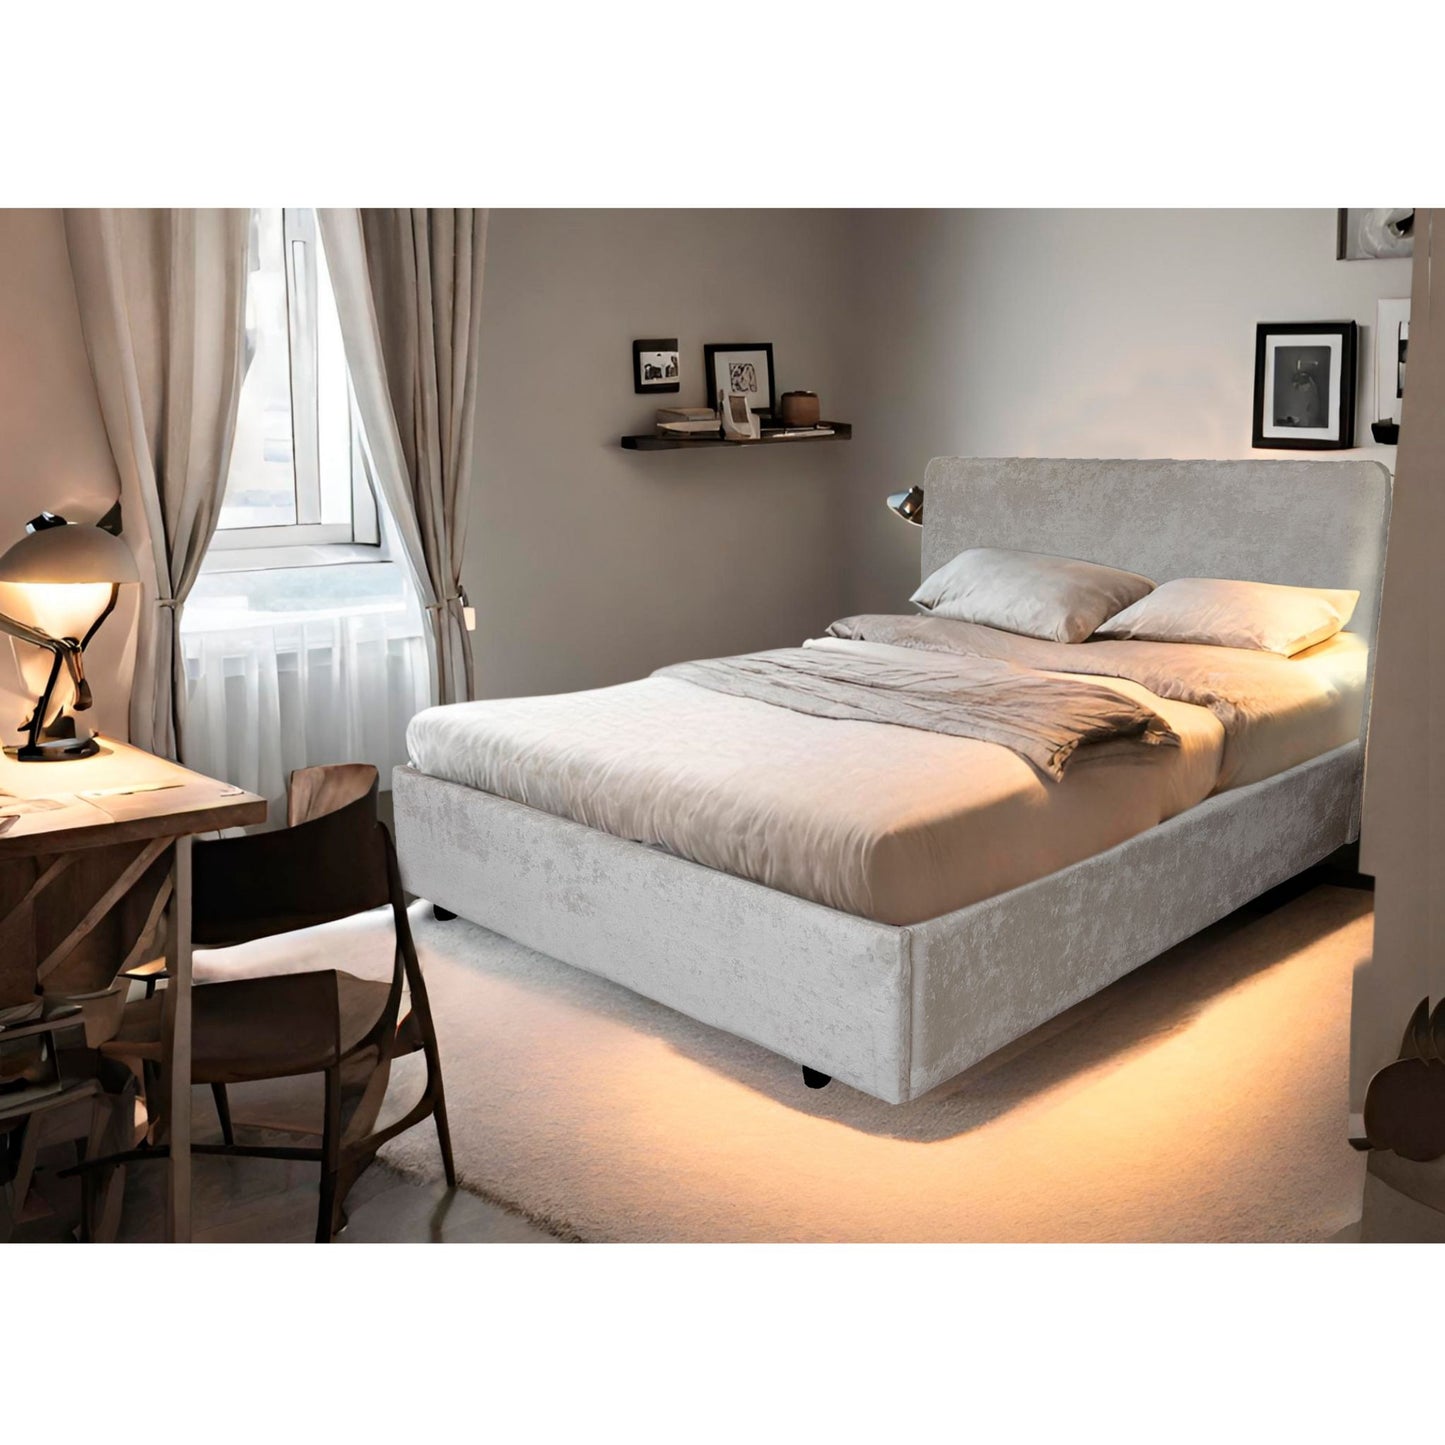 ROMULO Queen Bed Catalaya Marfil